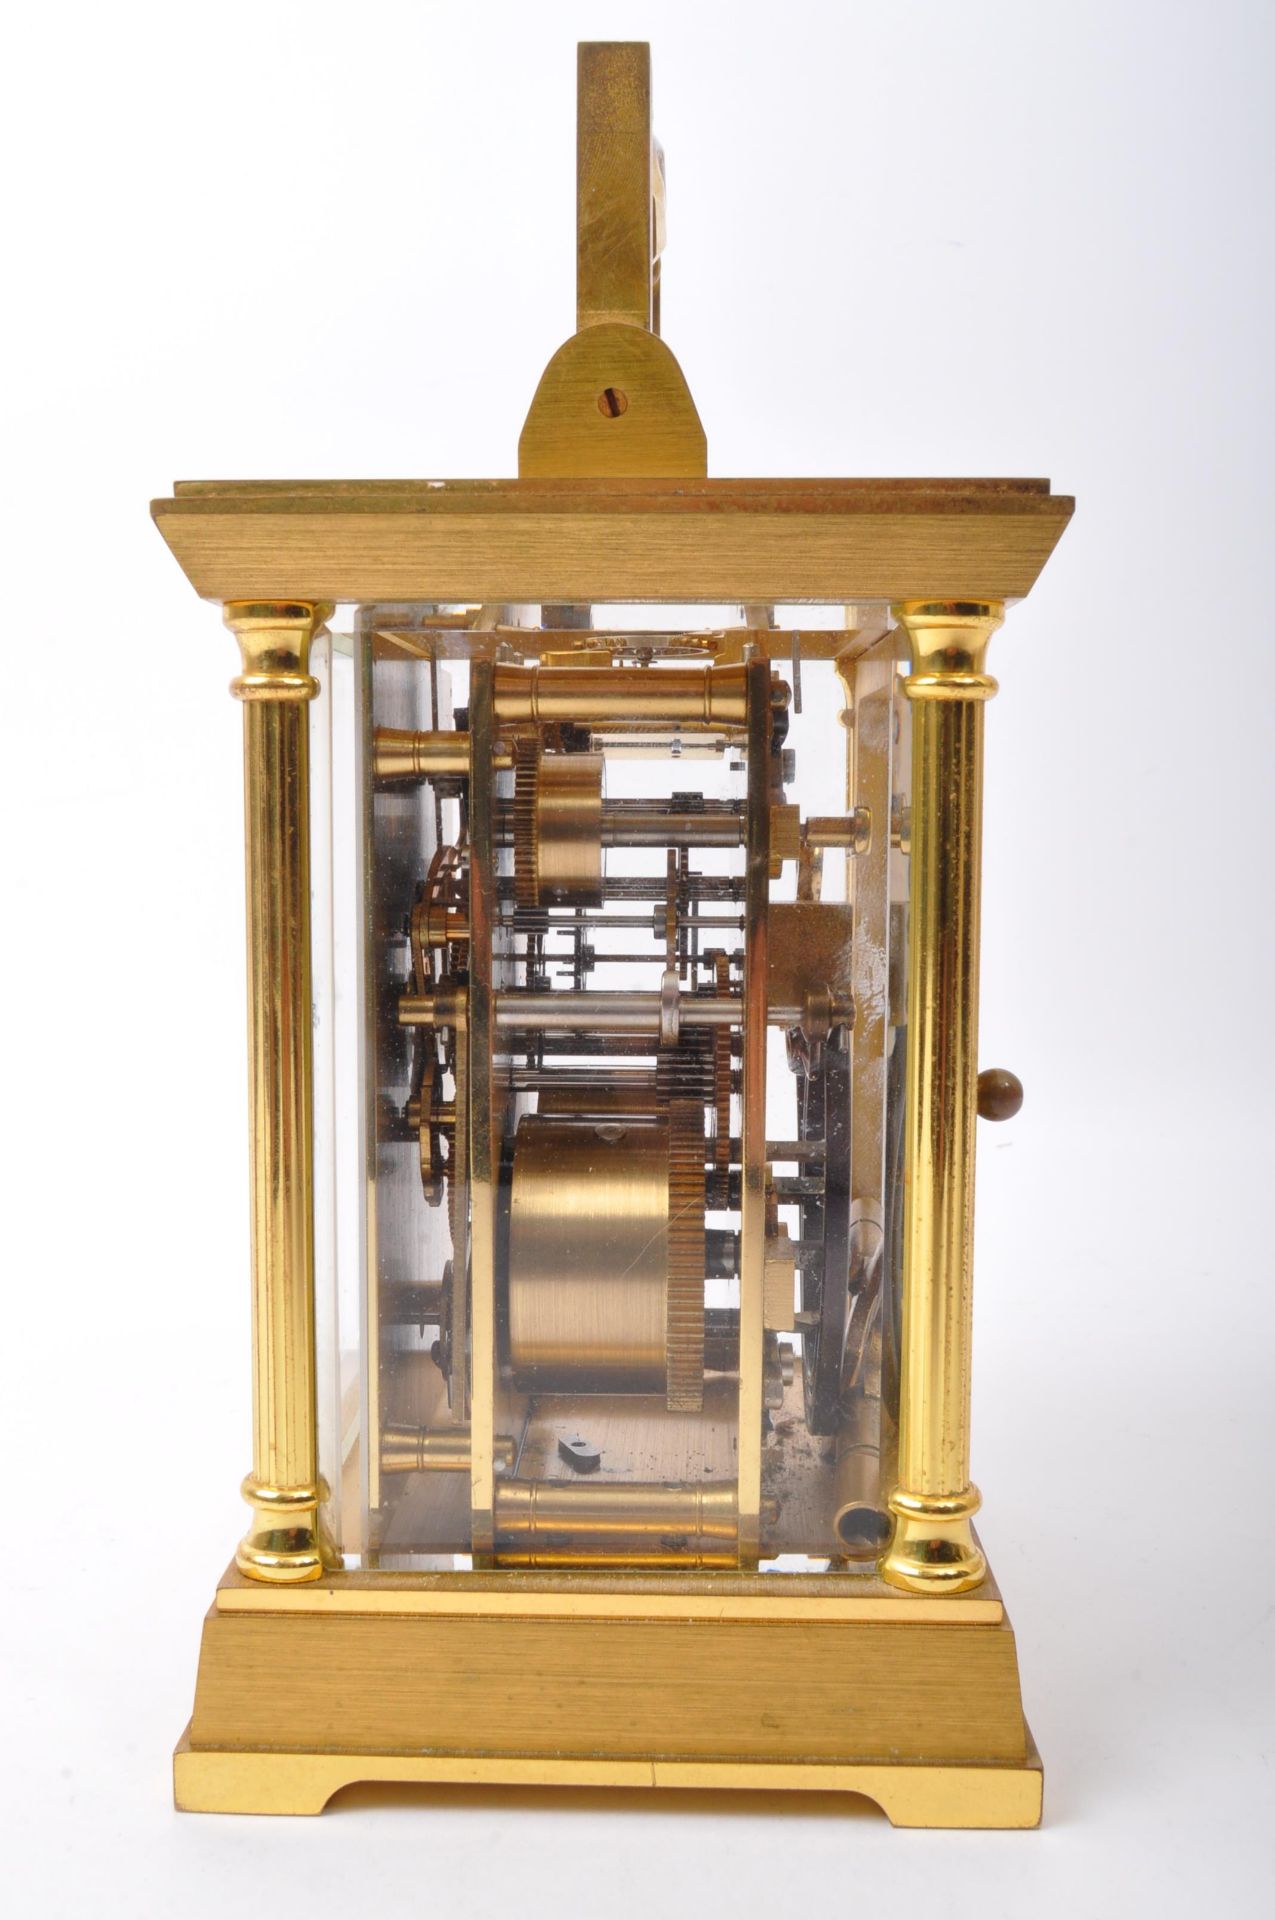 DENT OF LONDON - BRASS GILDED CARRIAGE CLOCK - Image 5 of 8